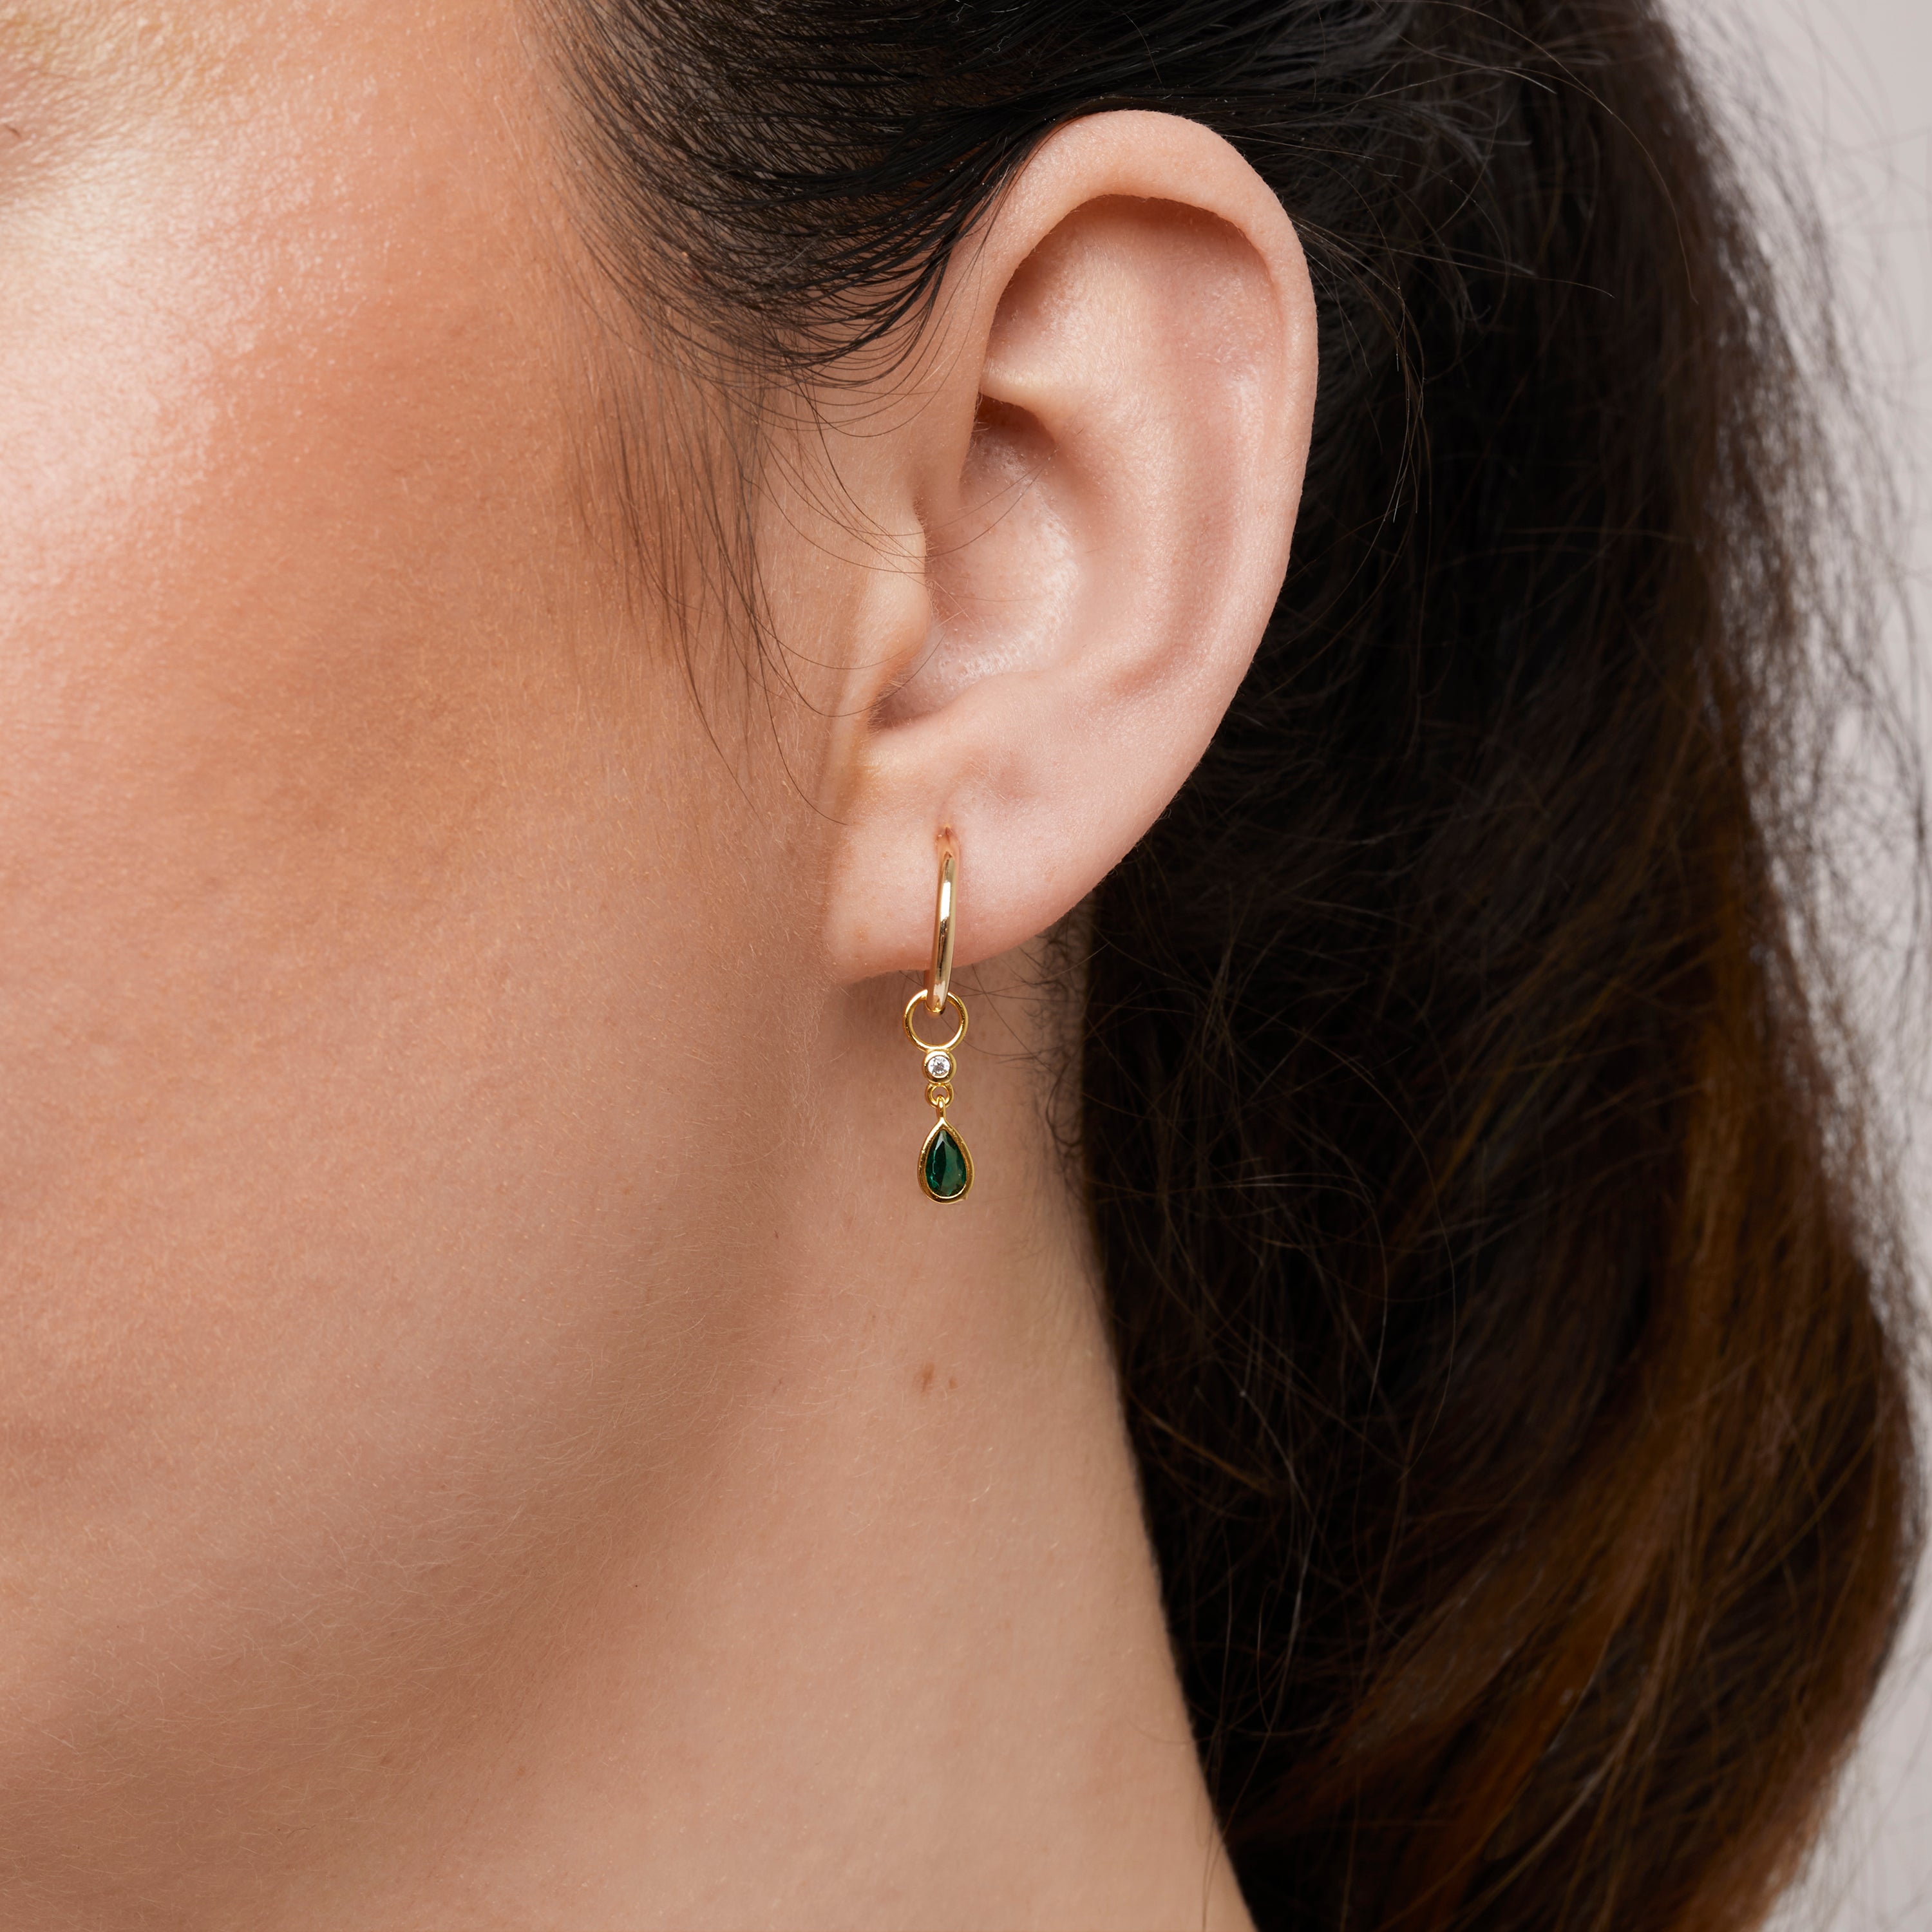 A model wearing the Emerald Drop Hoop Charms are made with high-quality materials, including 18K gold plating over 925 Sterling Silver. These charms are both non-tarnish and water resistant. The perfect combination of style and durability.